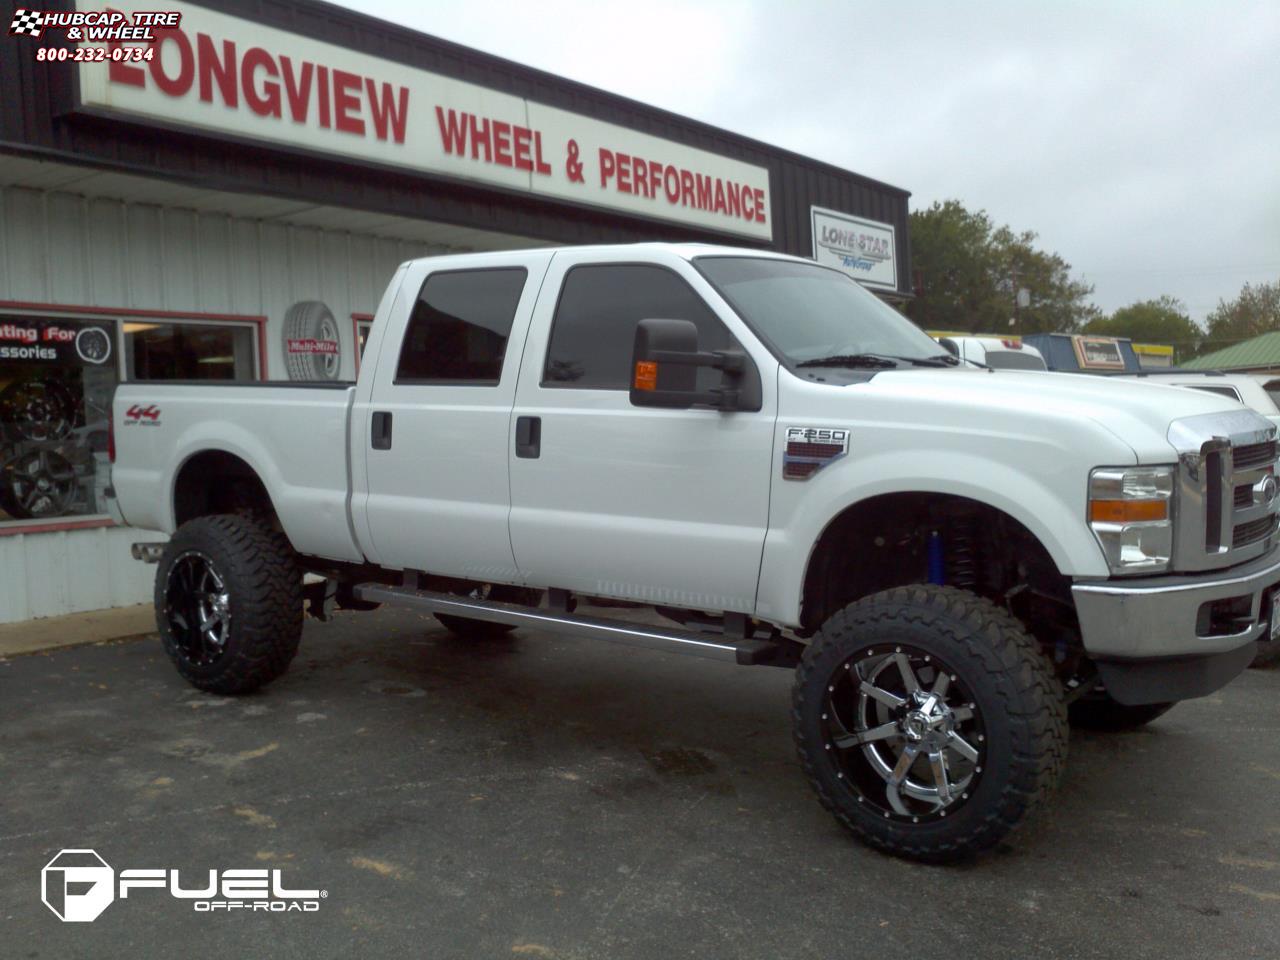 vehicle gallery/ford f 250 fuel maverick d260 22X14  Chrome with Gloss Black Lip wheels and rims